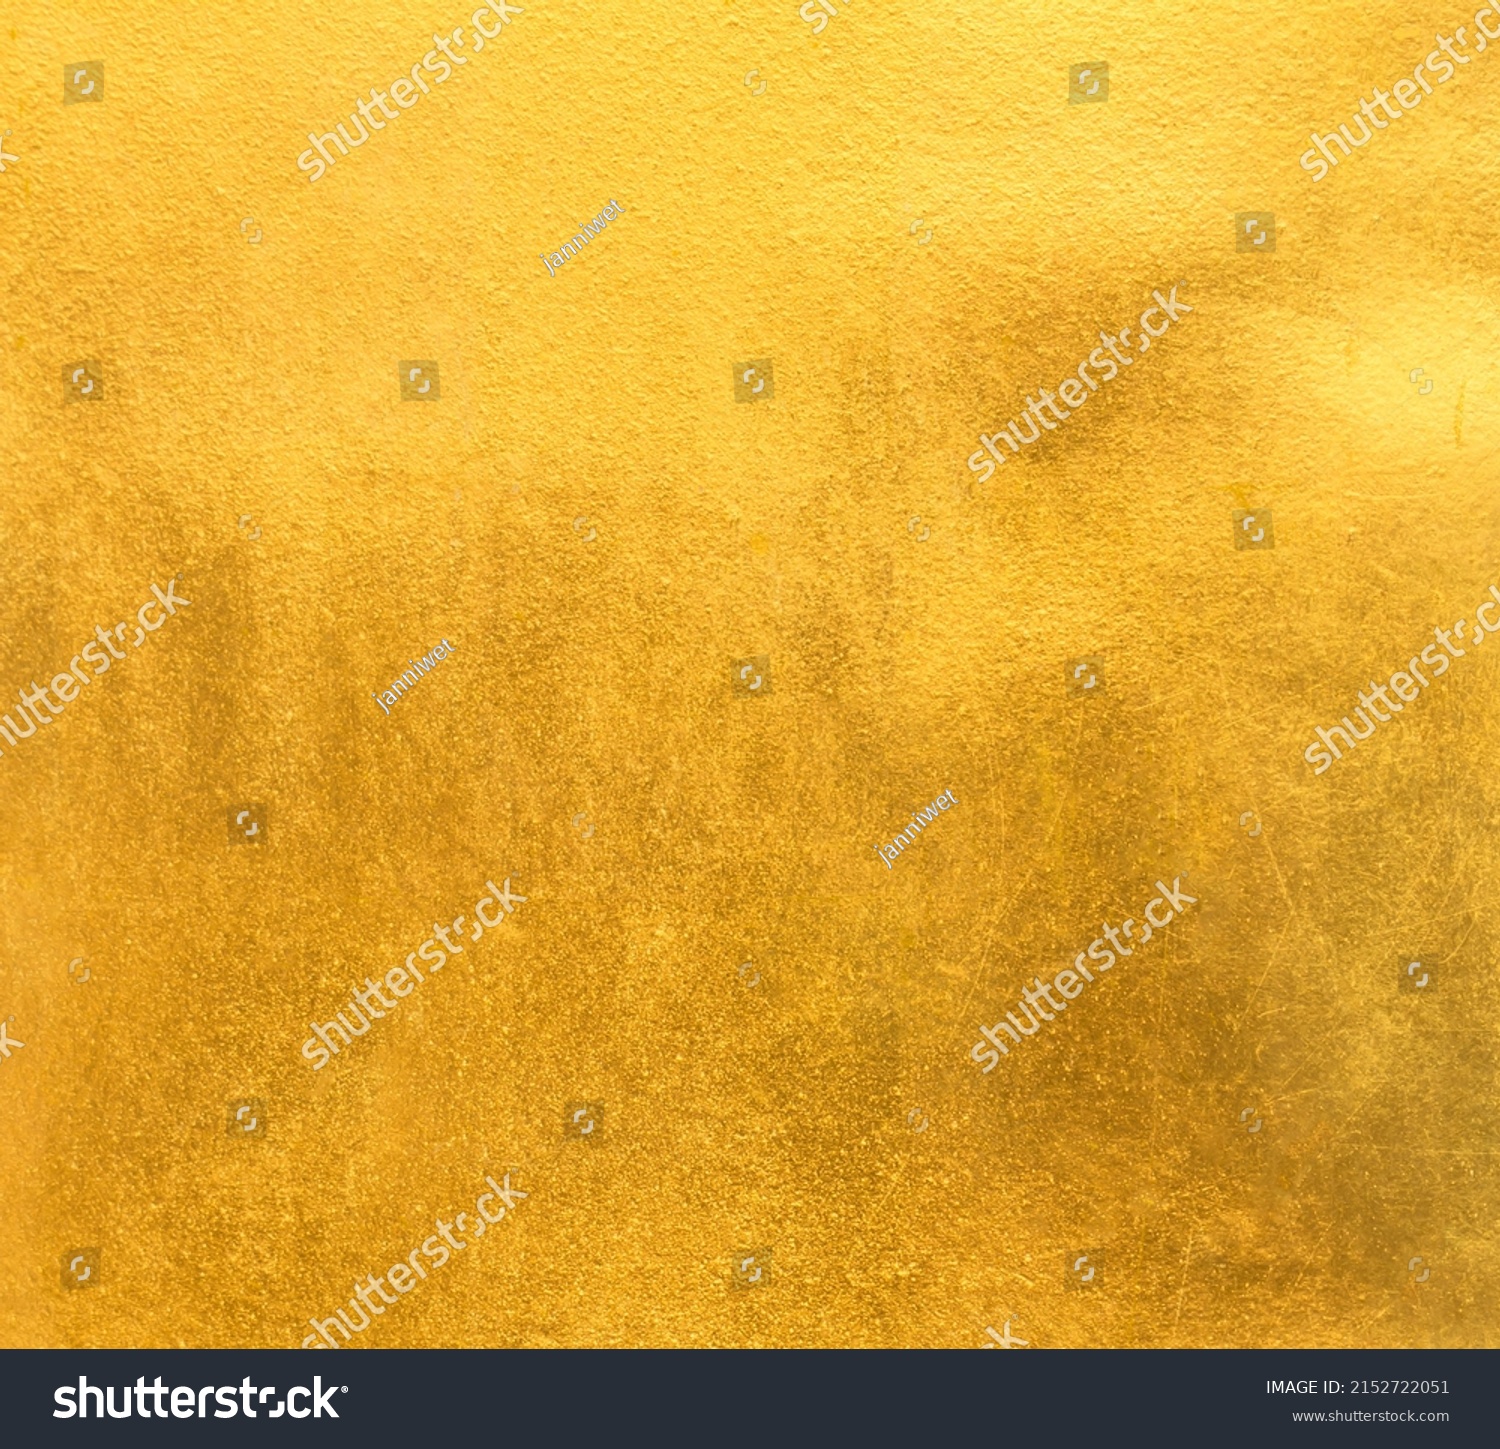 Gold Background Texture Gradients Shadow Stock Photo 2152722051 ...